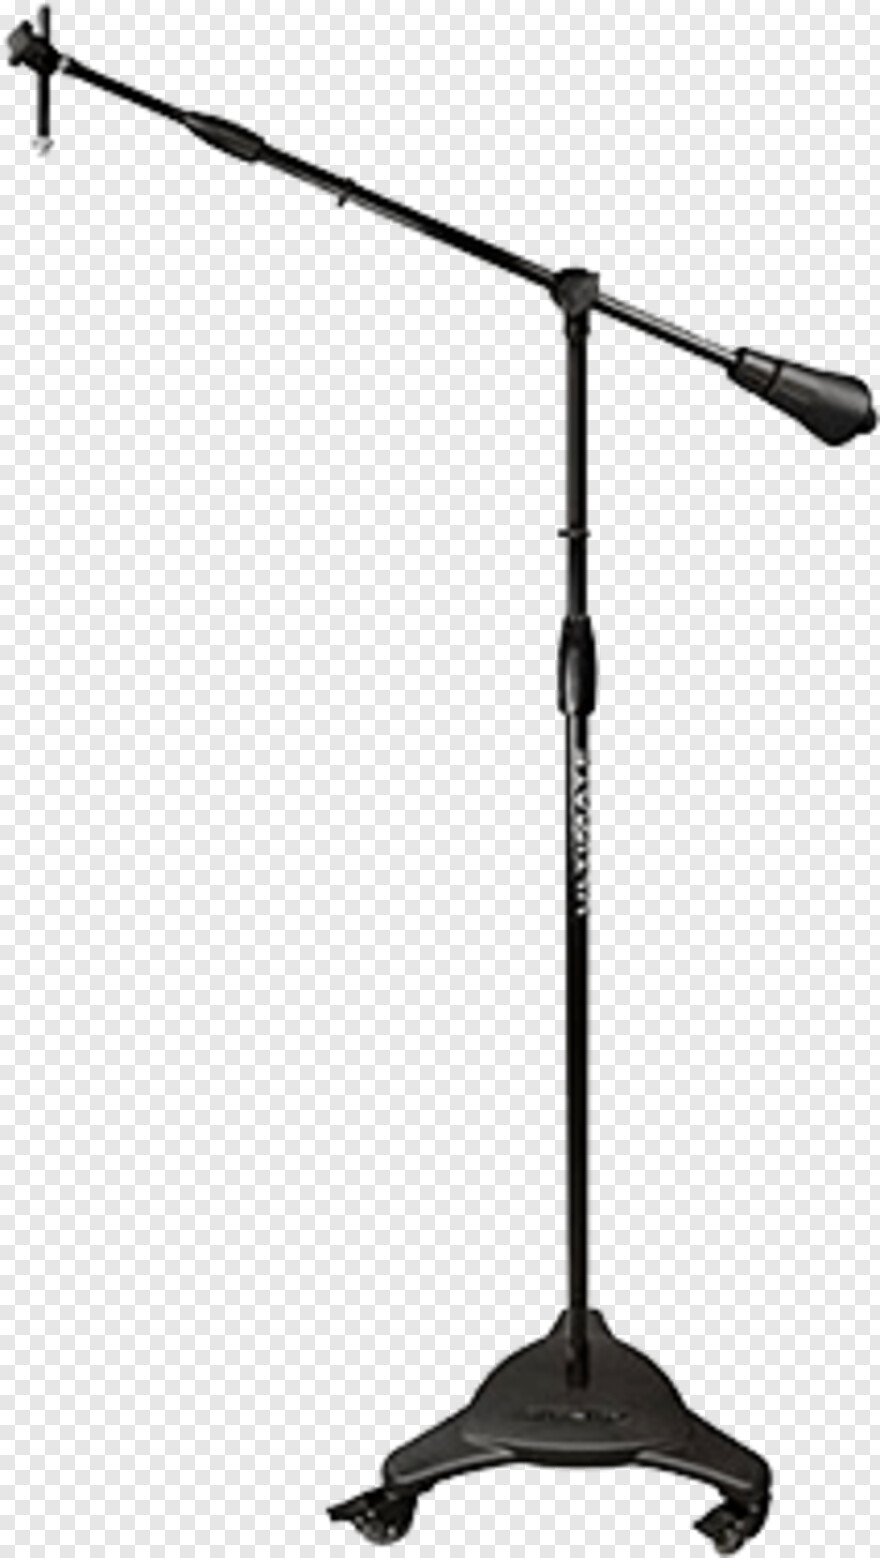 microphone-icon # 331650